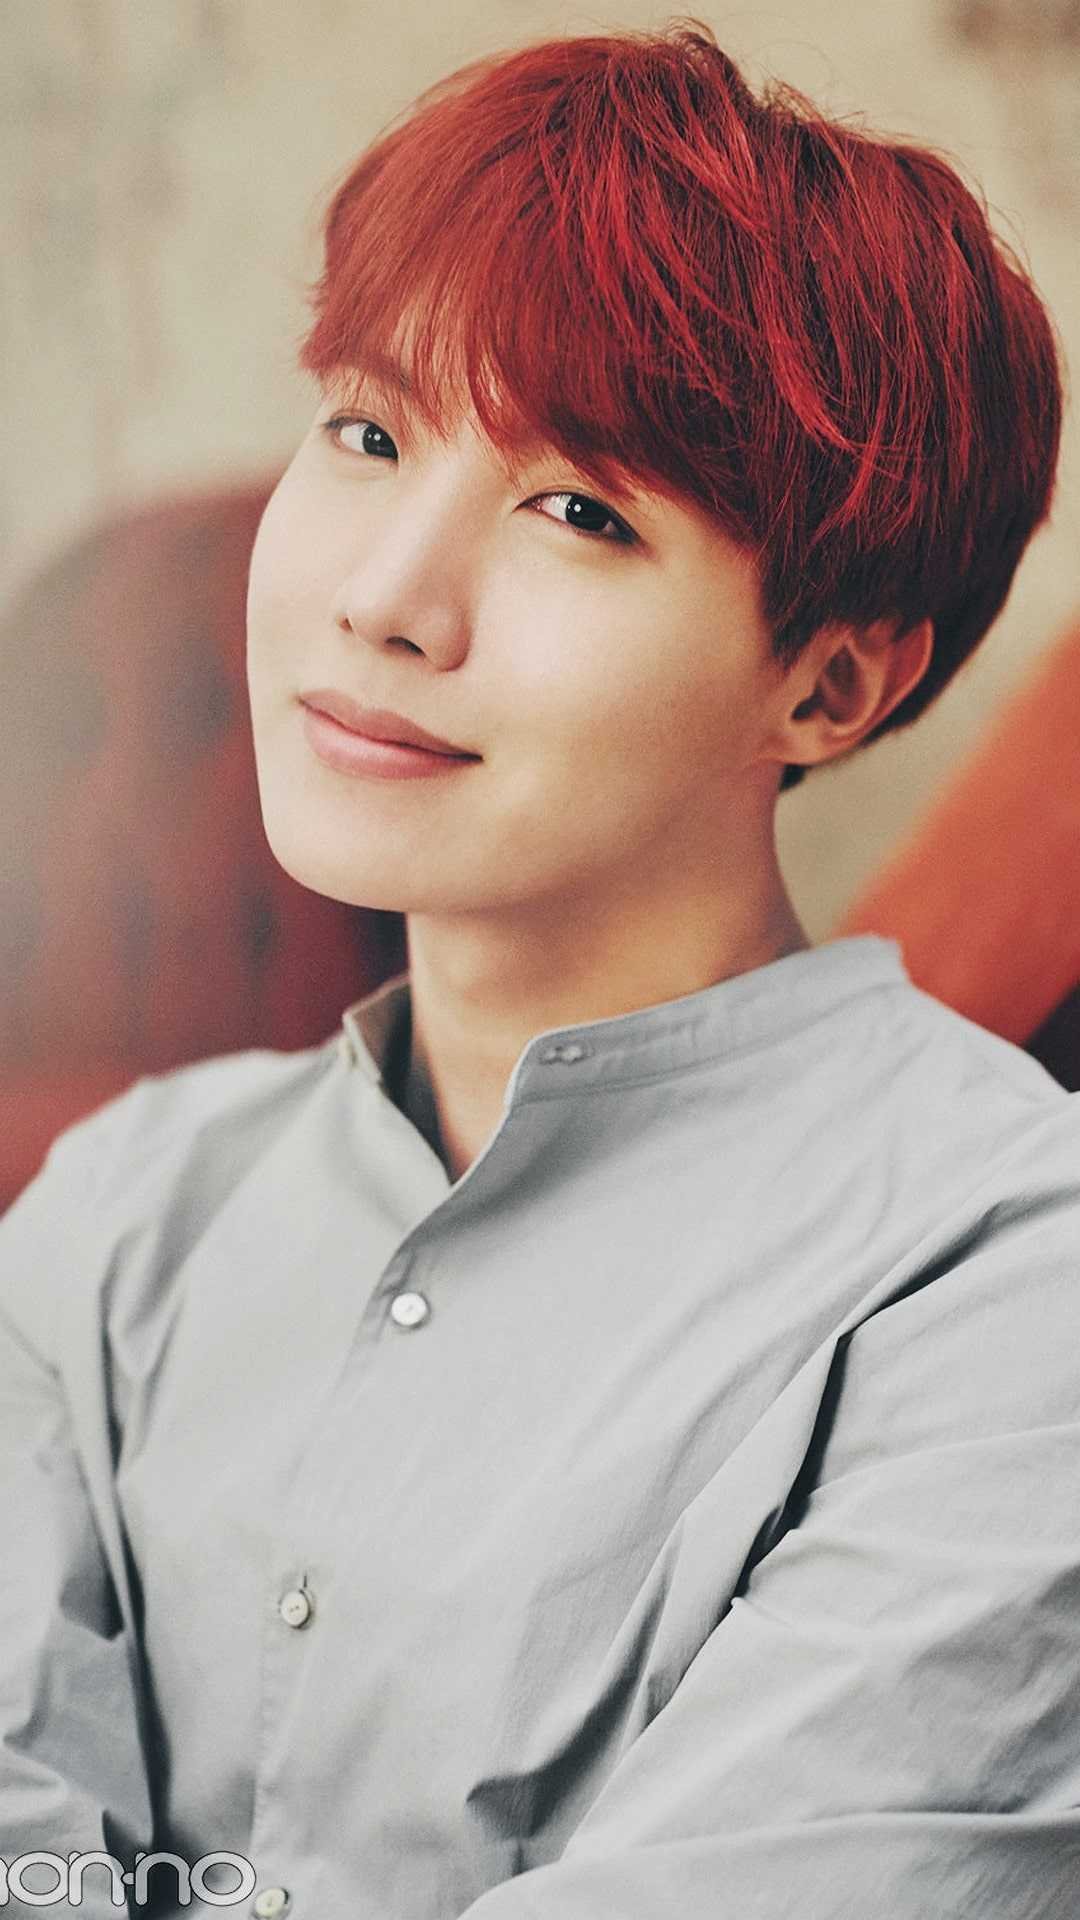 Bts Jhope aesthetic Wallpaper Download | MobCup